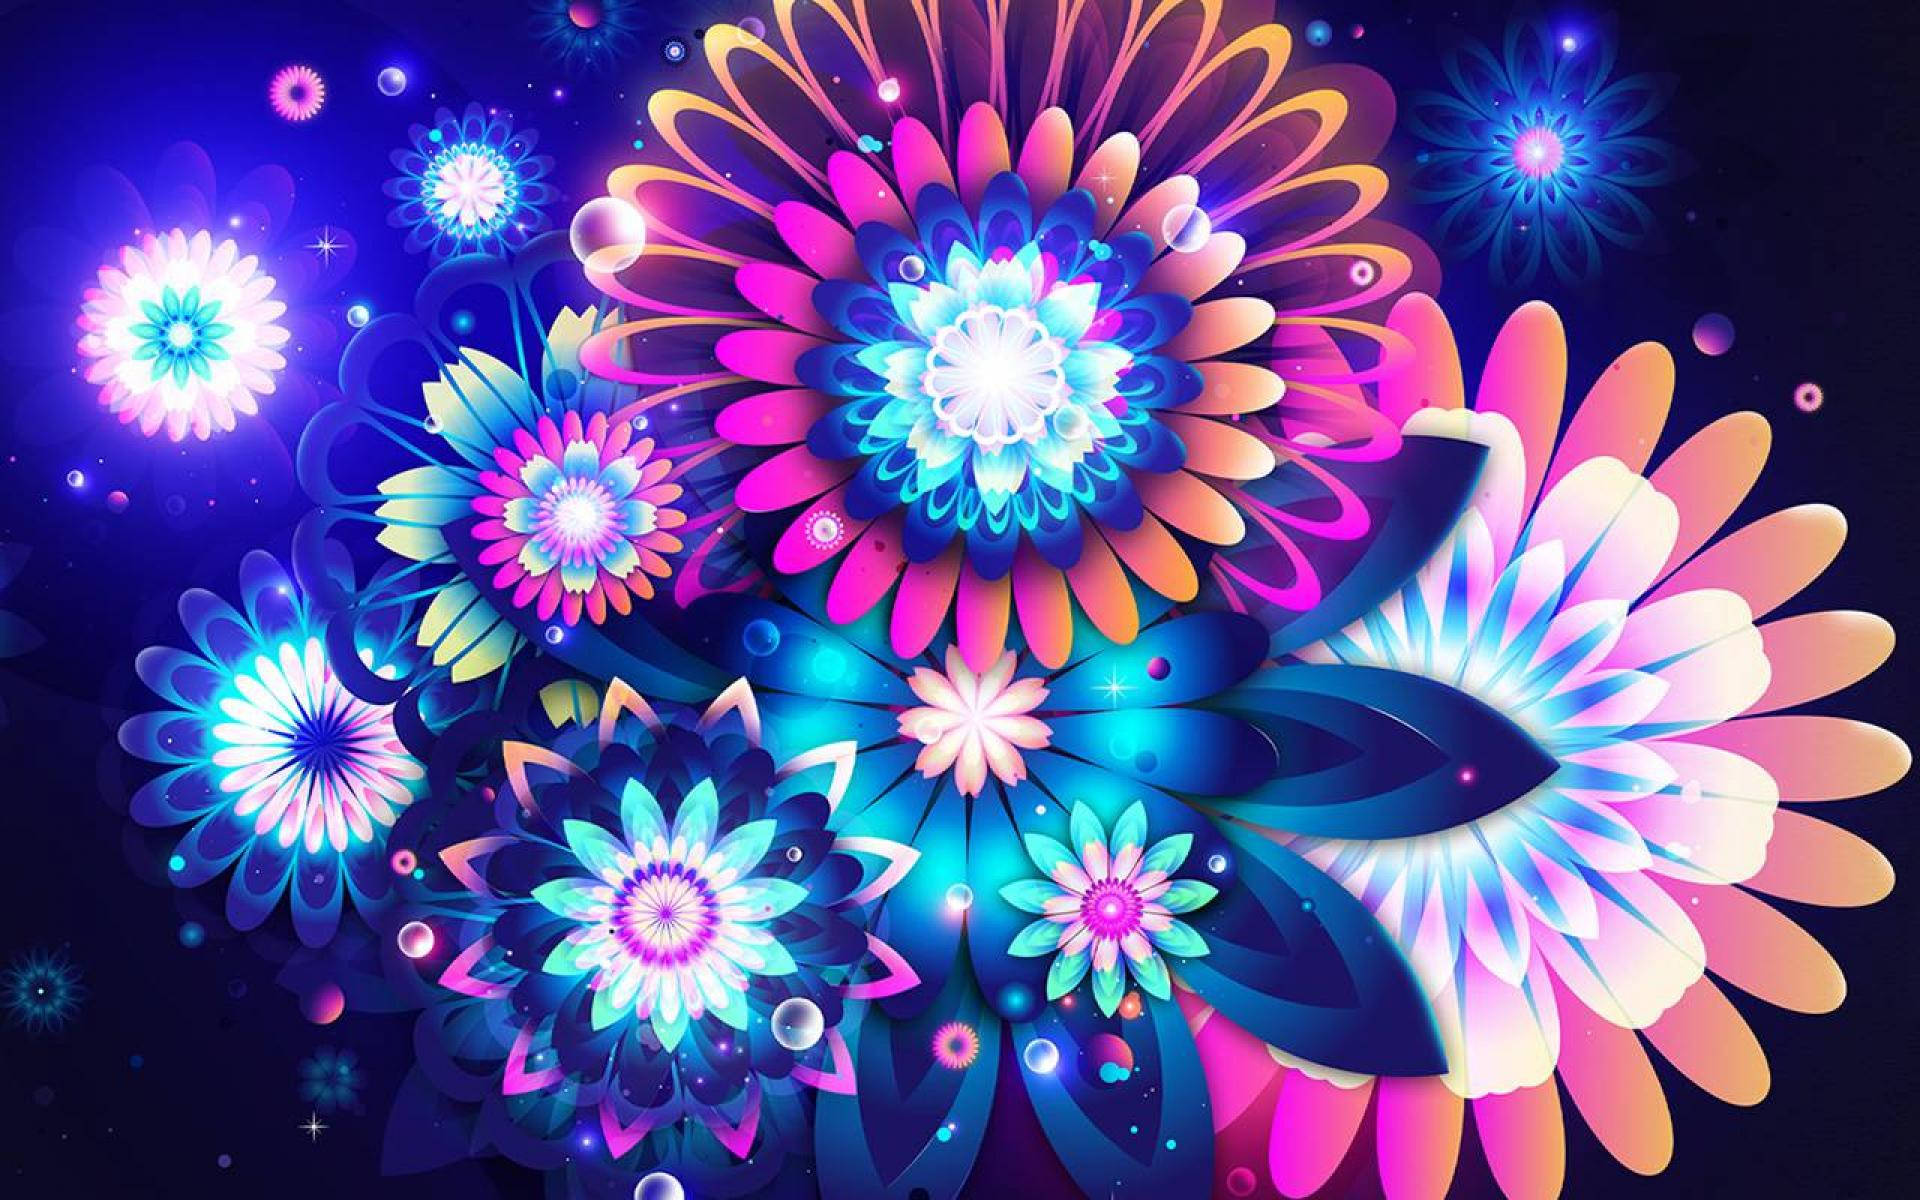 A Colorful Flower Design With Bright Lights